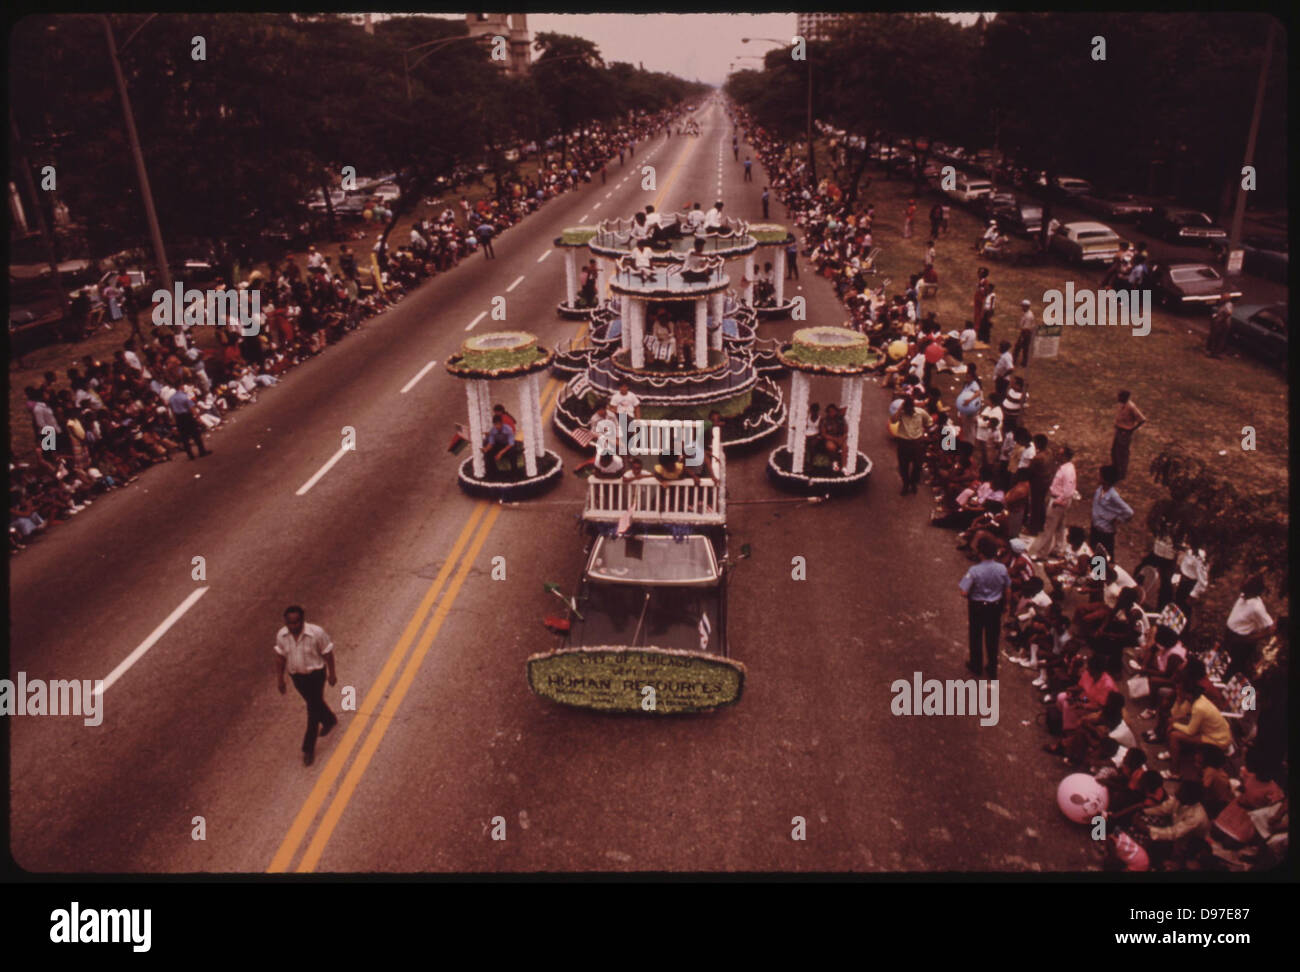 Bud Billiken Day Parade As It Travels Chicago's South Side On Dr. Martin L. King Jr. Drive, 08/1973 Stock Photo